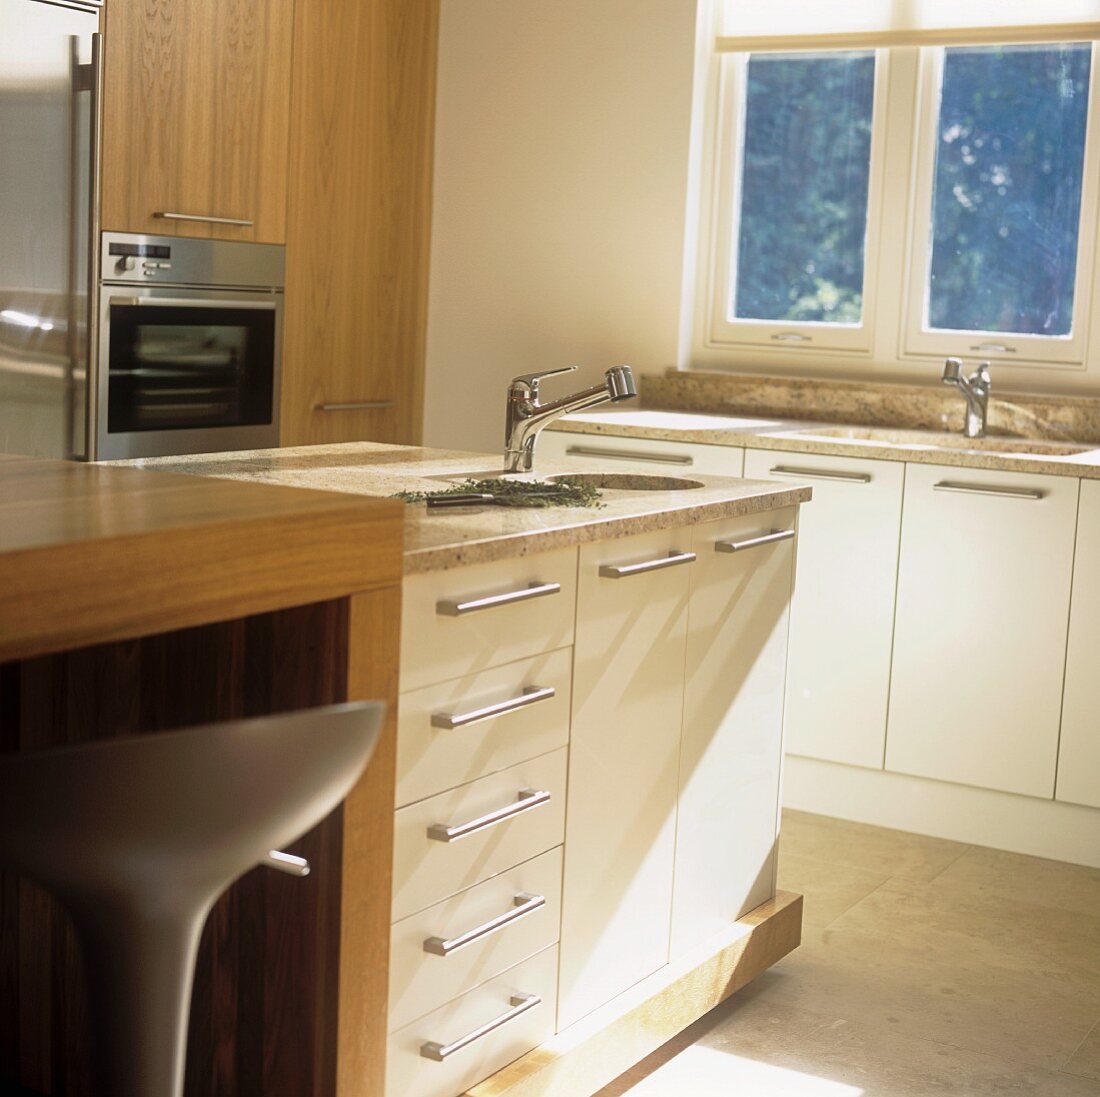 A free-standing sink with white cupboards underneath and a wooden counter in a contemporary kitchen